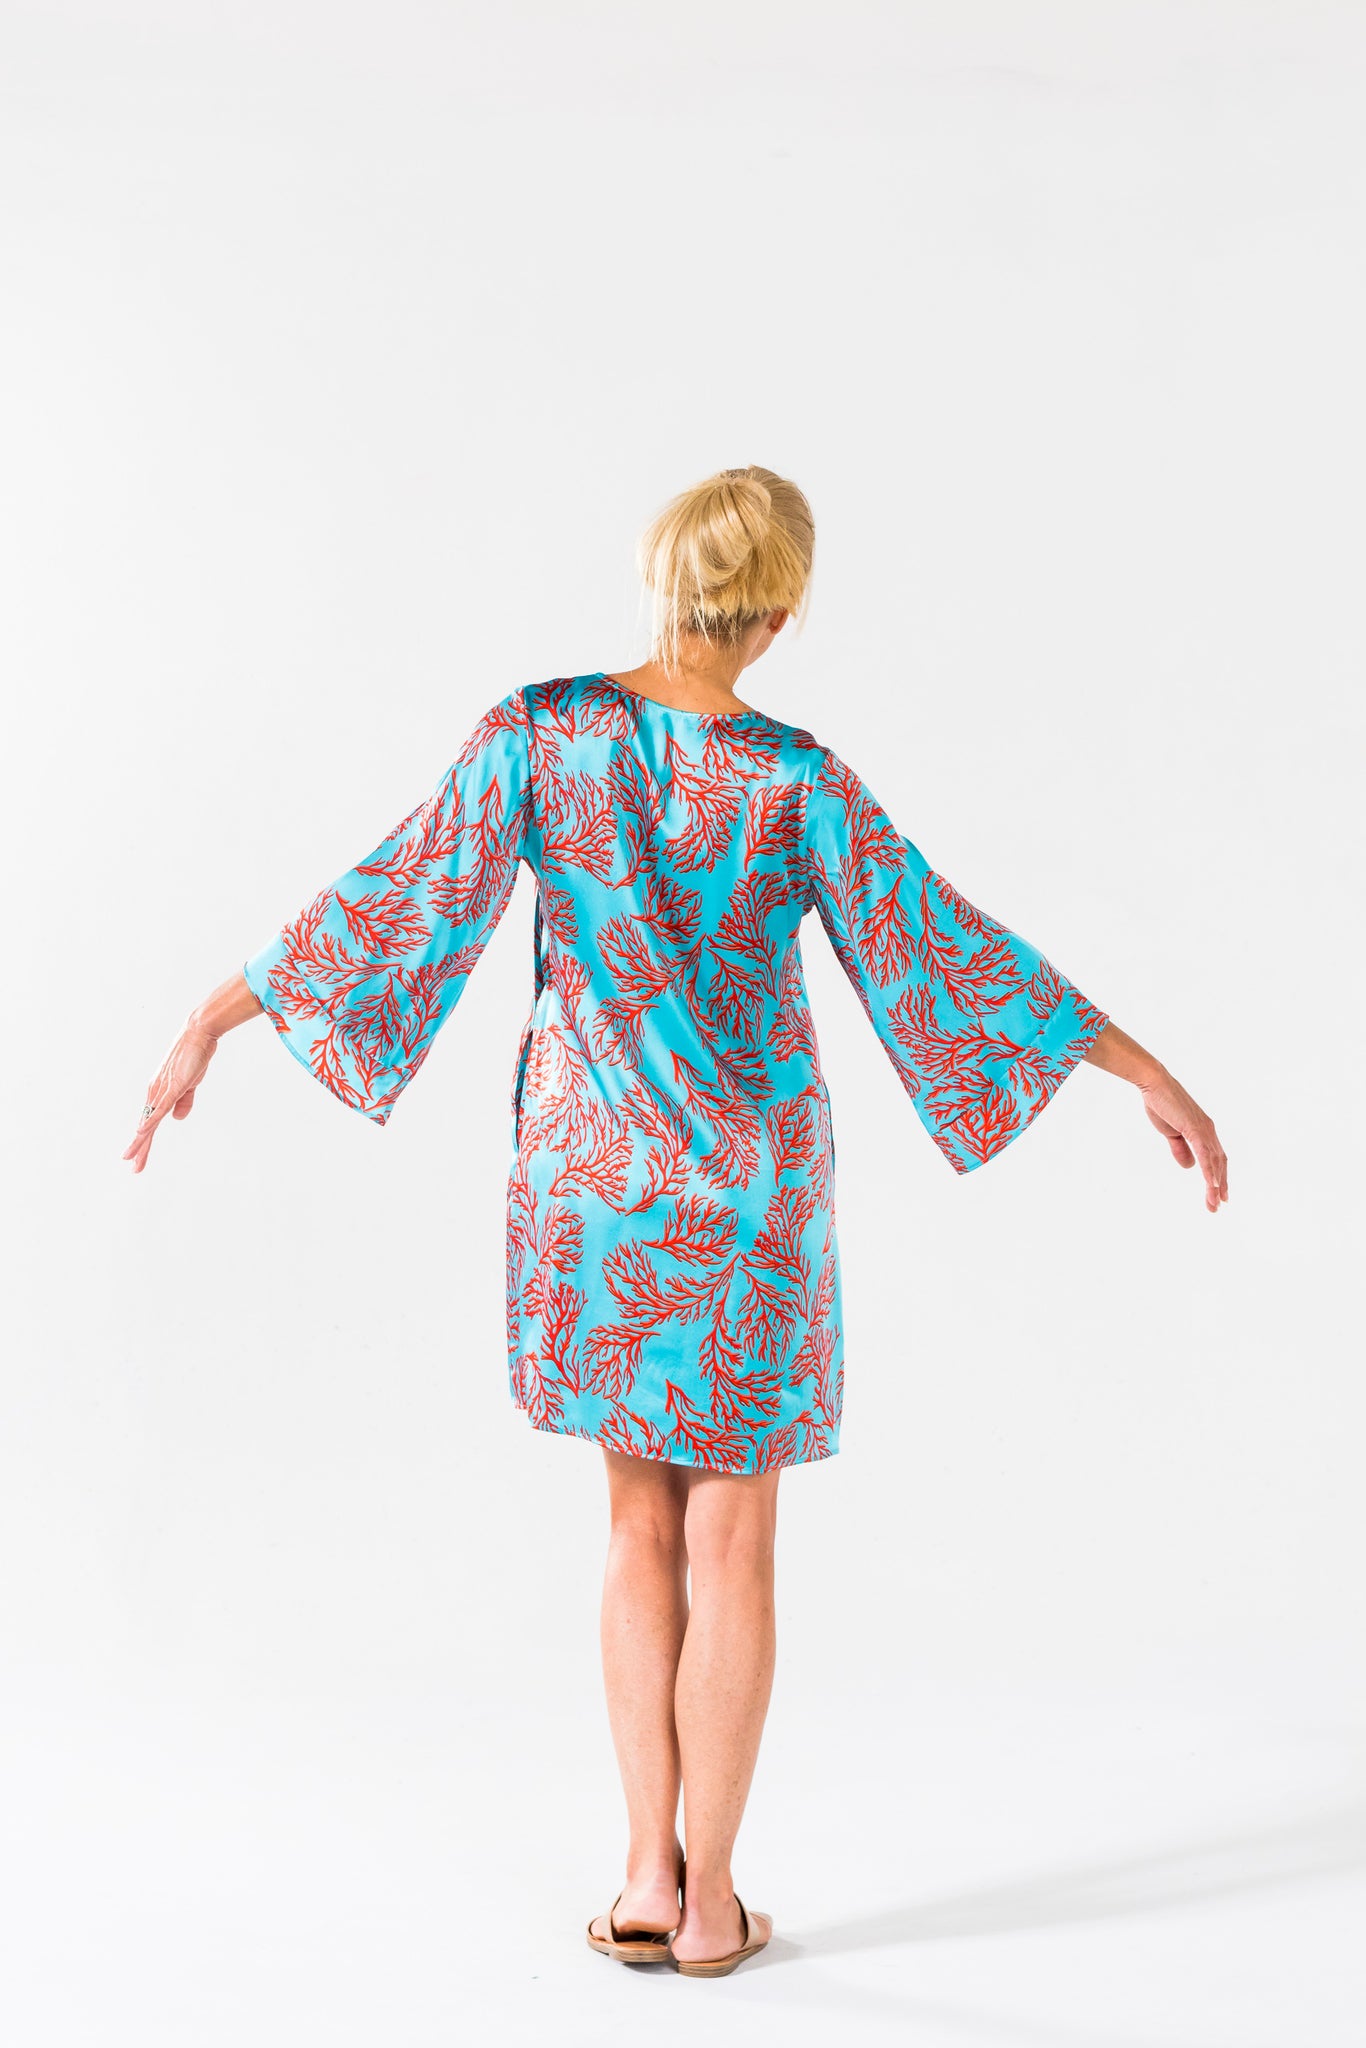 Ice Cube Dress - Turquoise Coral